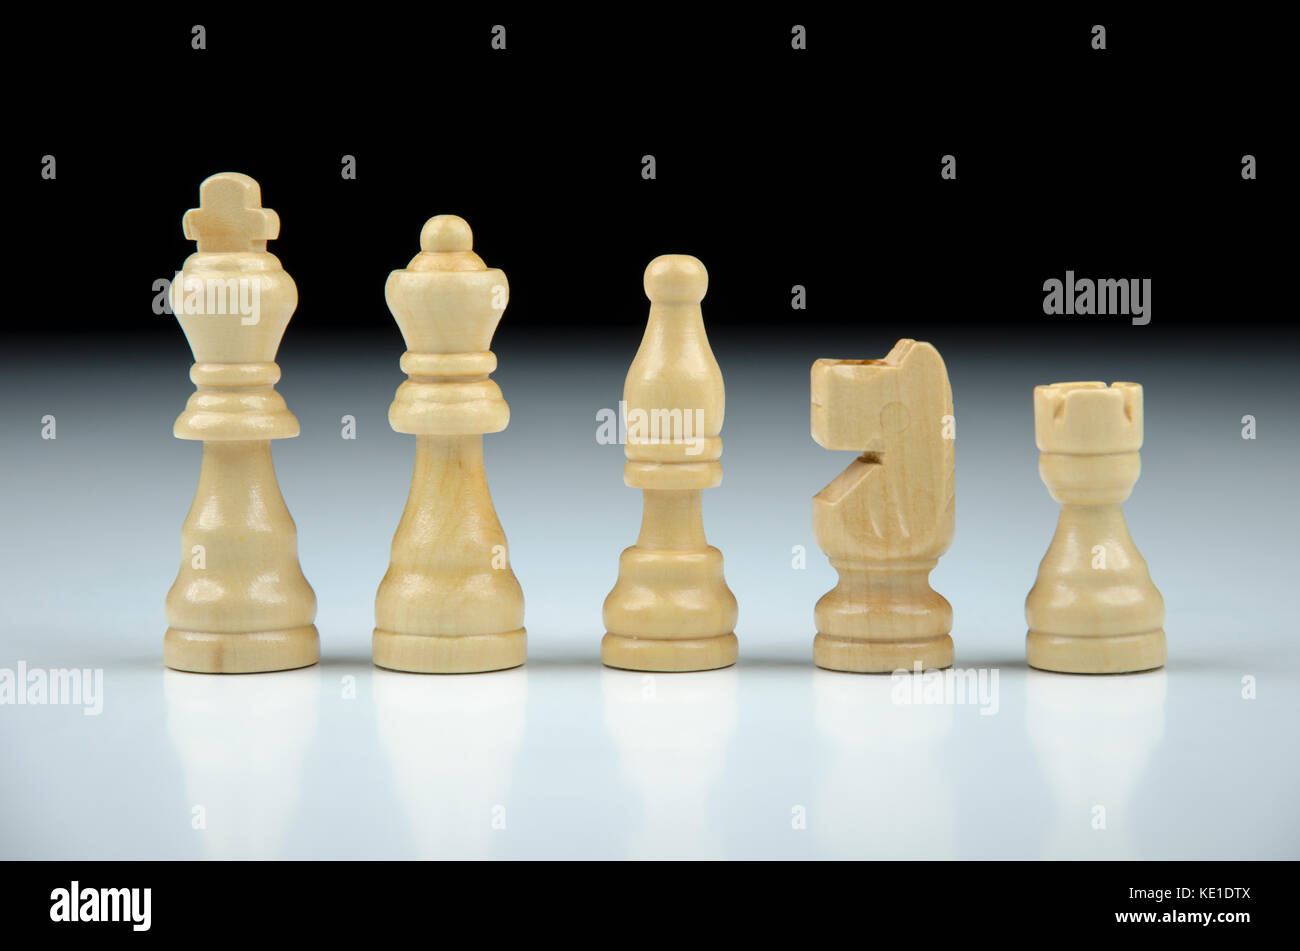 Close-up view of a row of white chess pieces on a black-white blurred background with reflection Stock Photo